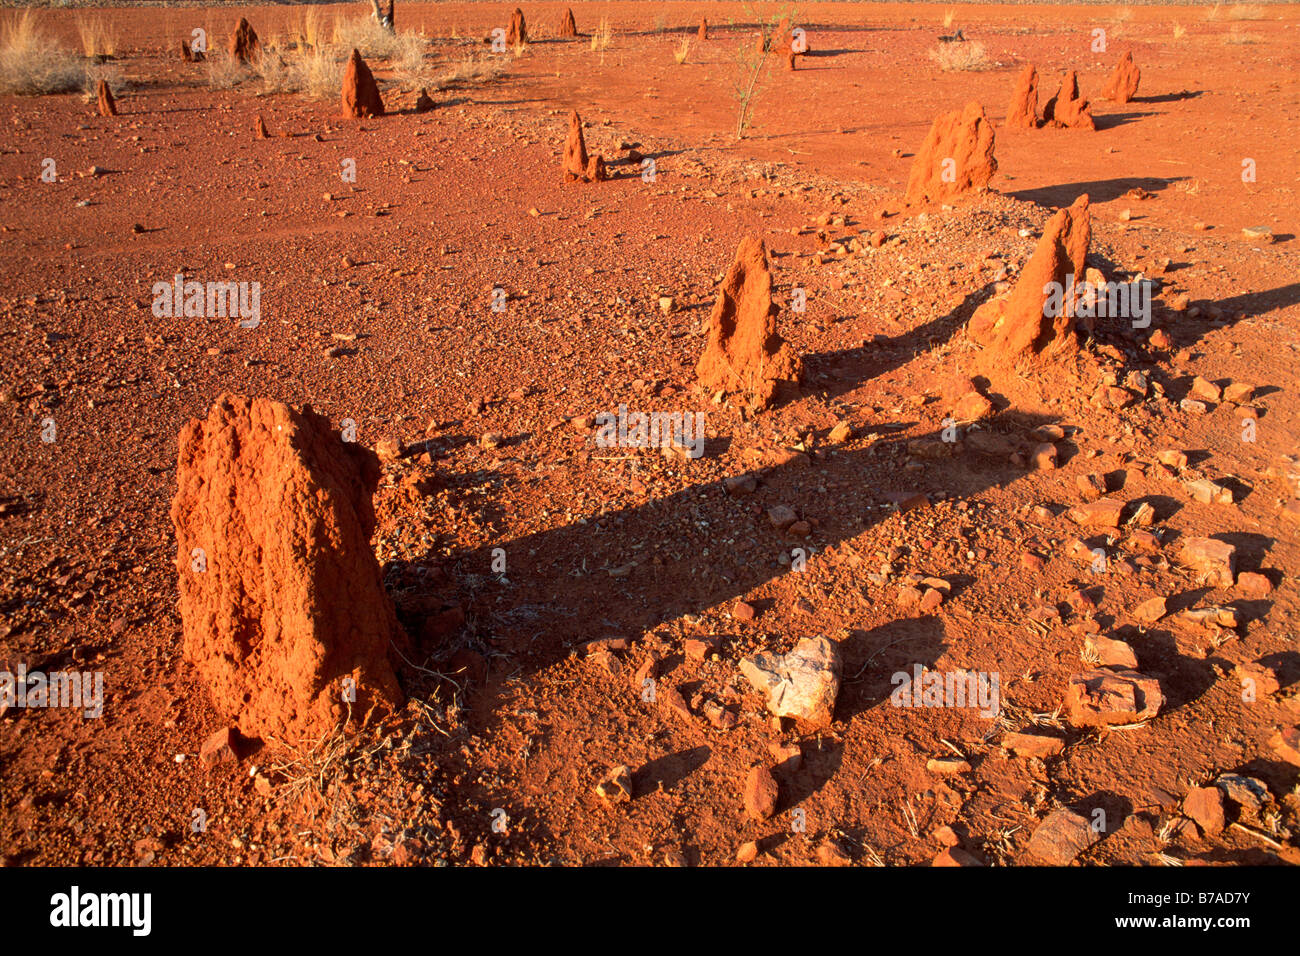 Termite hill in the outback, Northern Territory, Australia Stock Photo